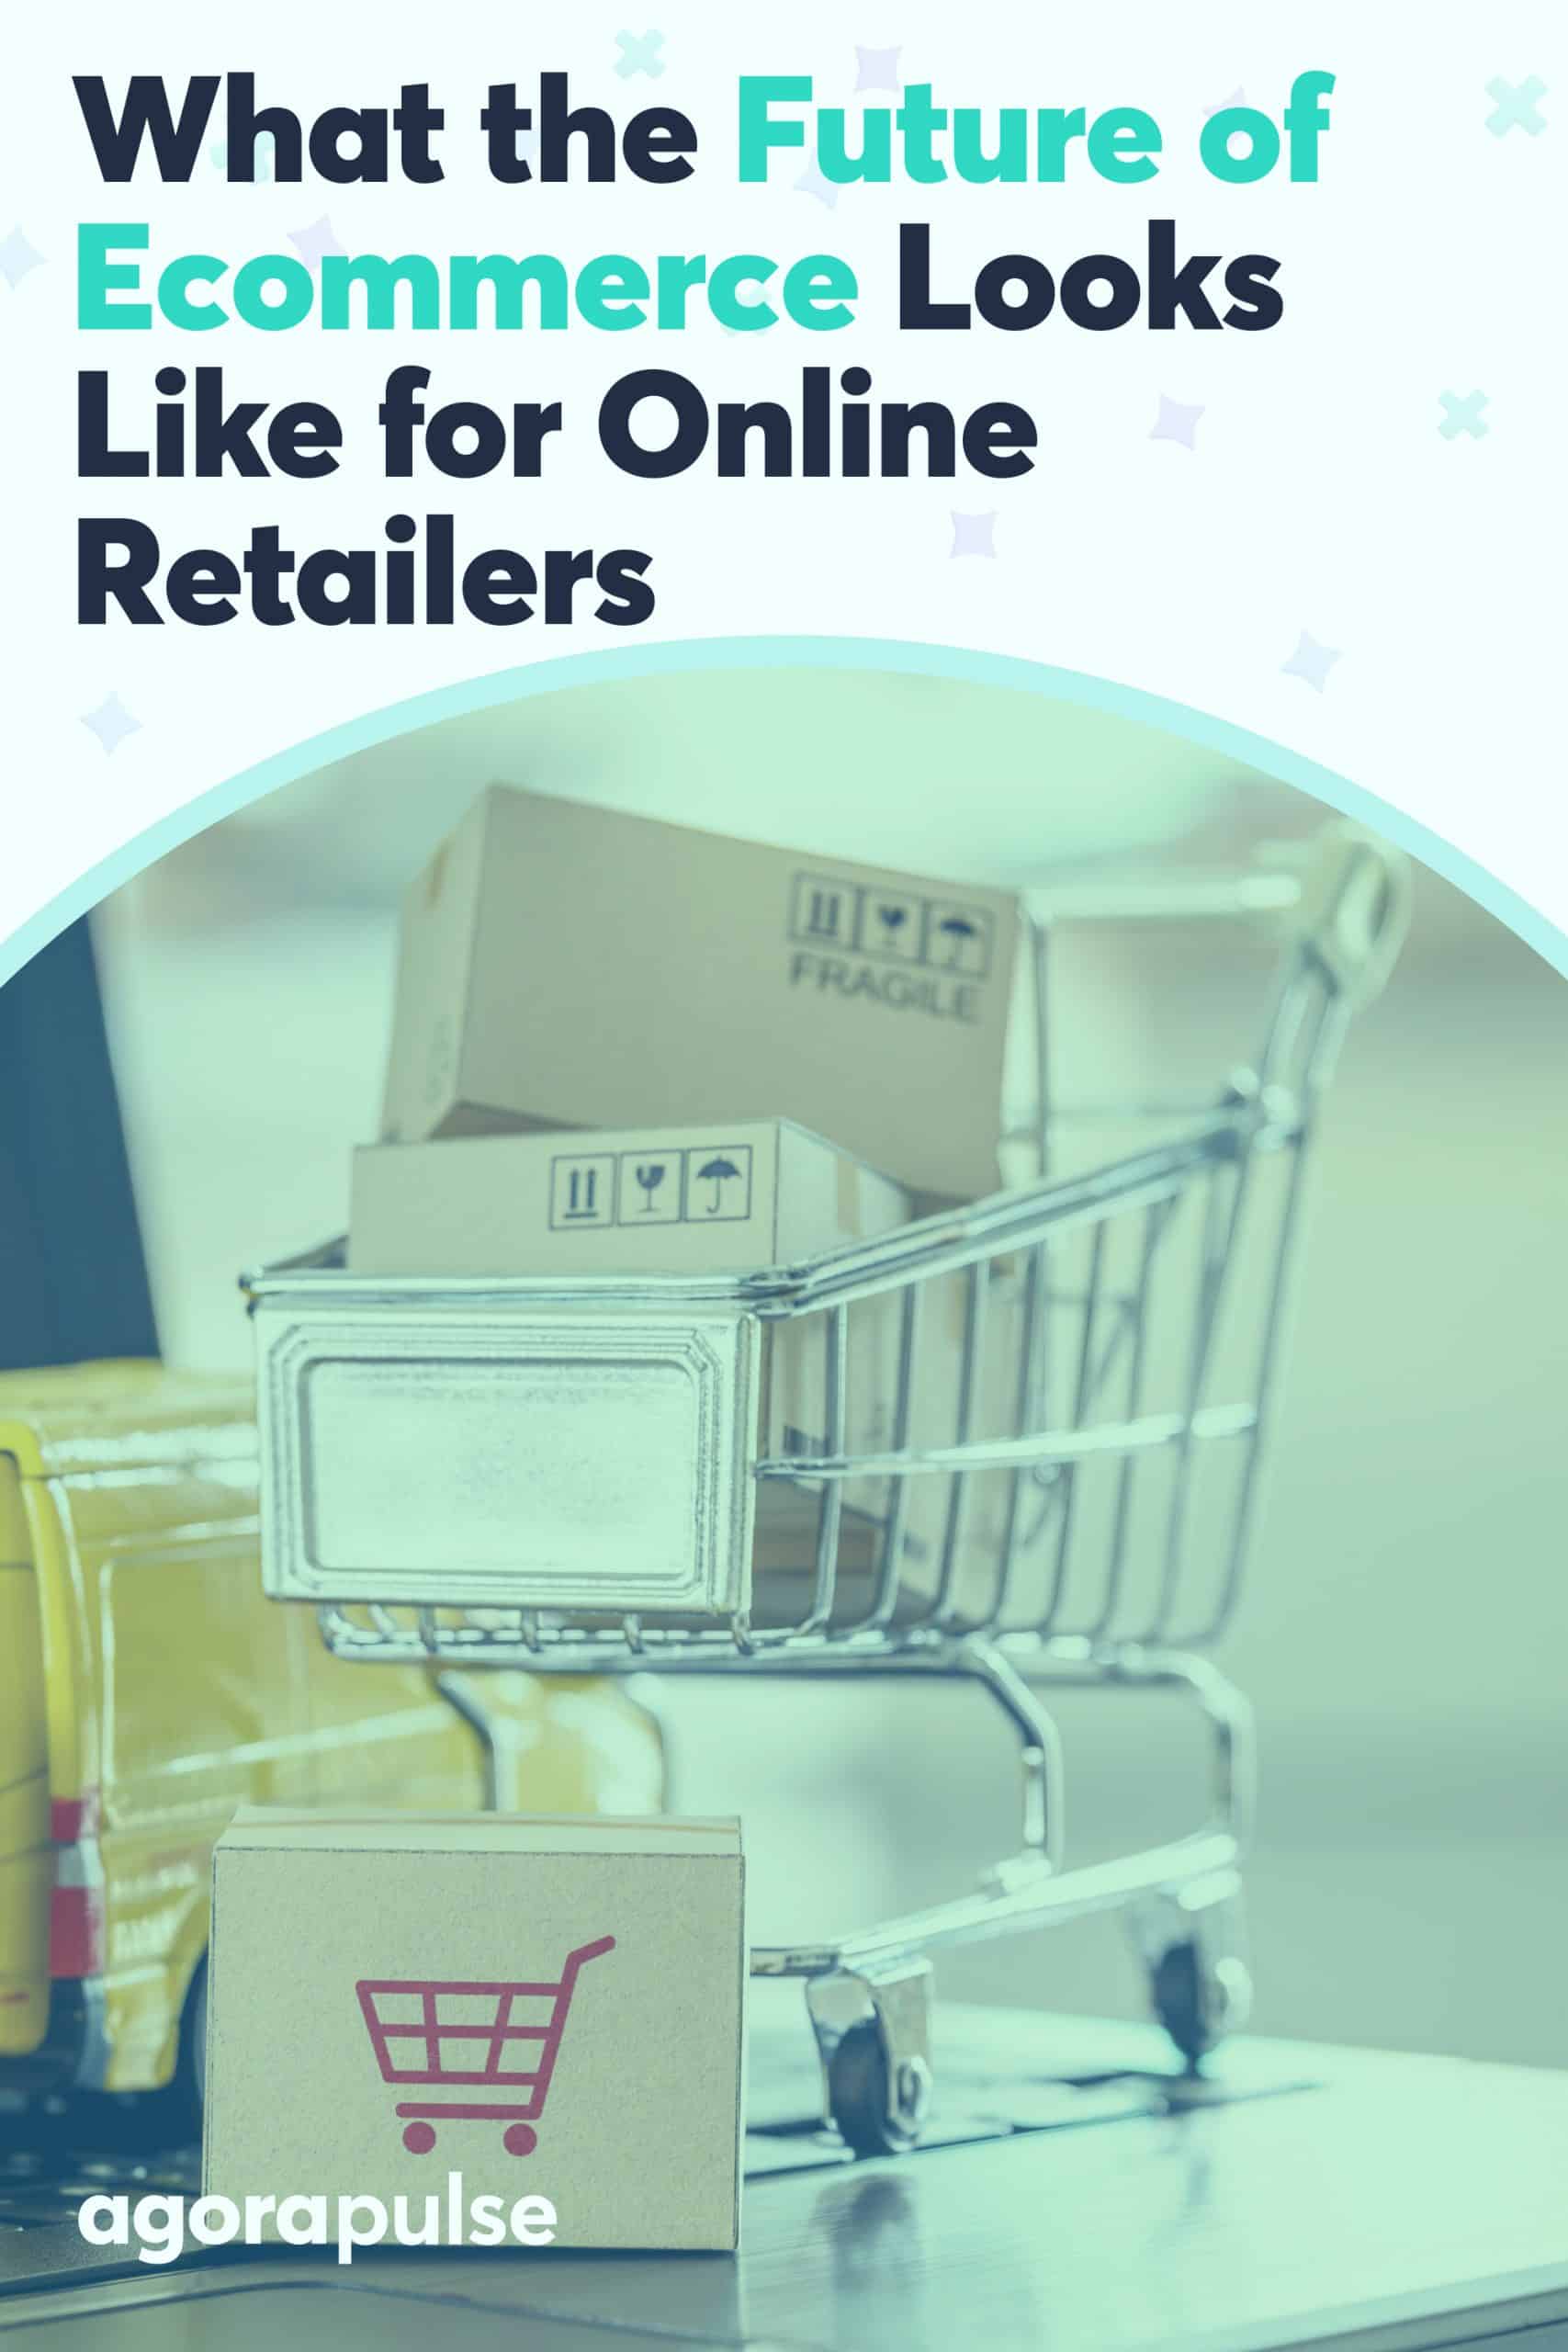 What the Future of Ecommerce Looks Like for Online Retailers